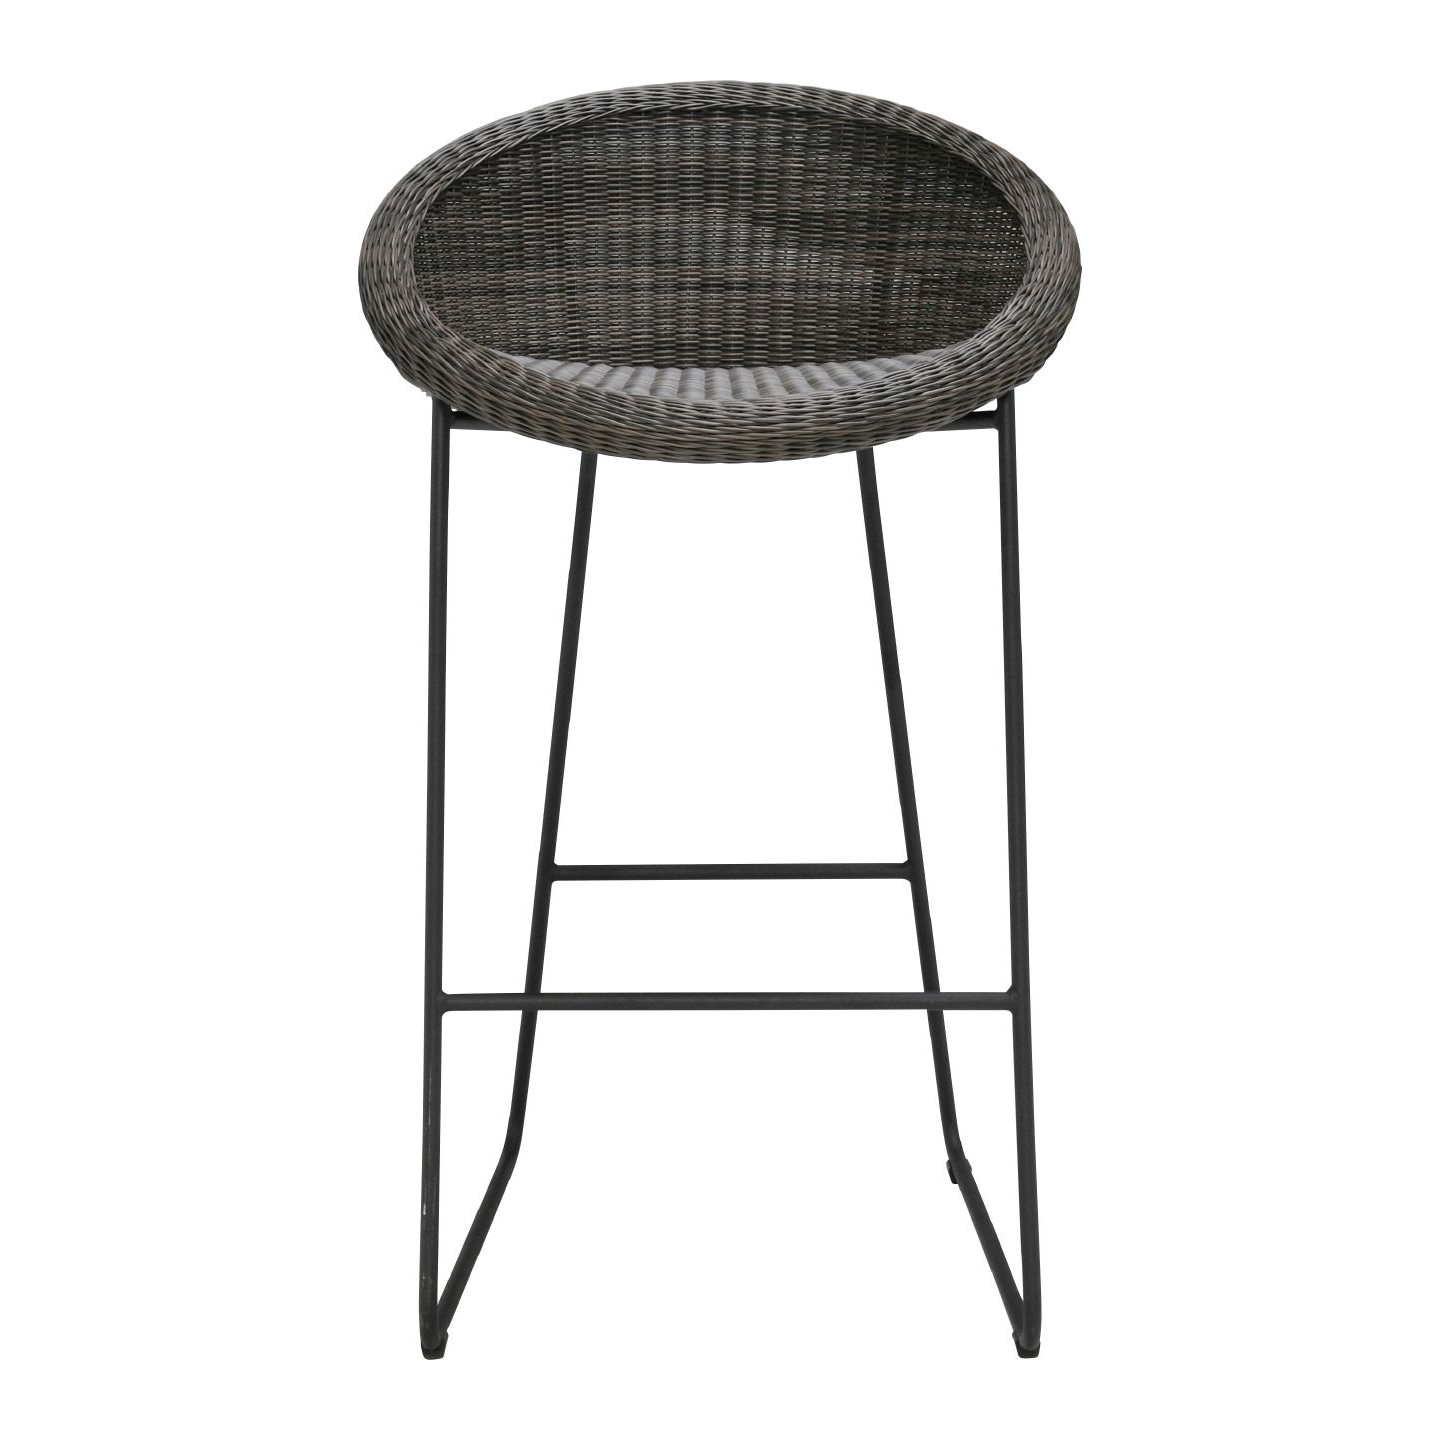 Haworth Gigi II stool in black color with metal legs front view